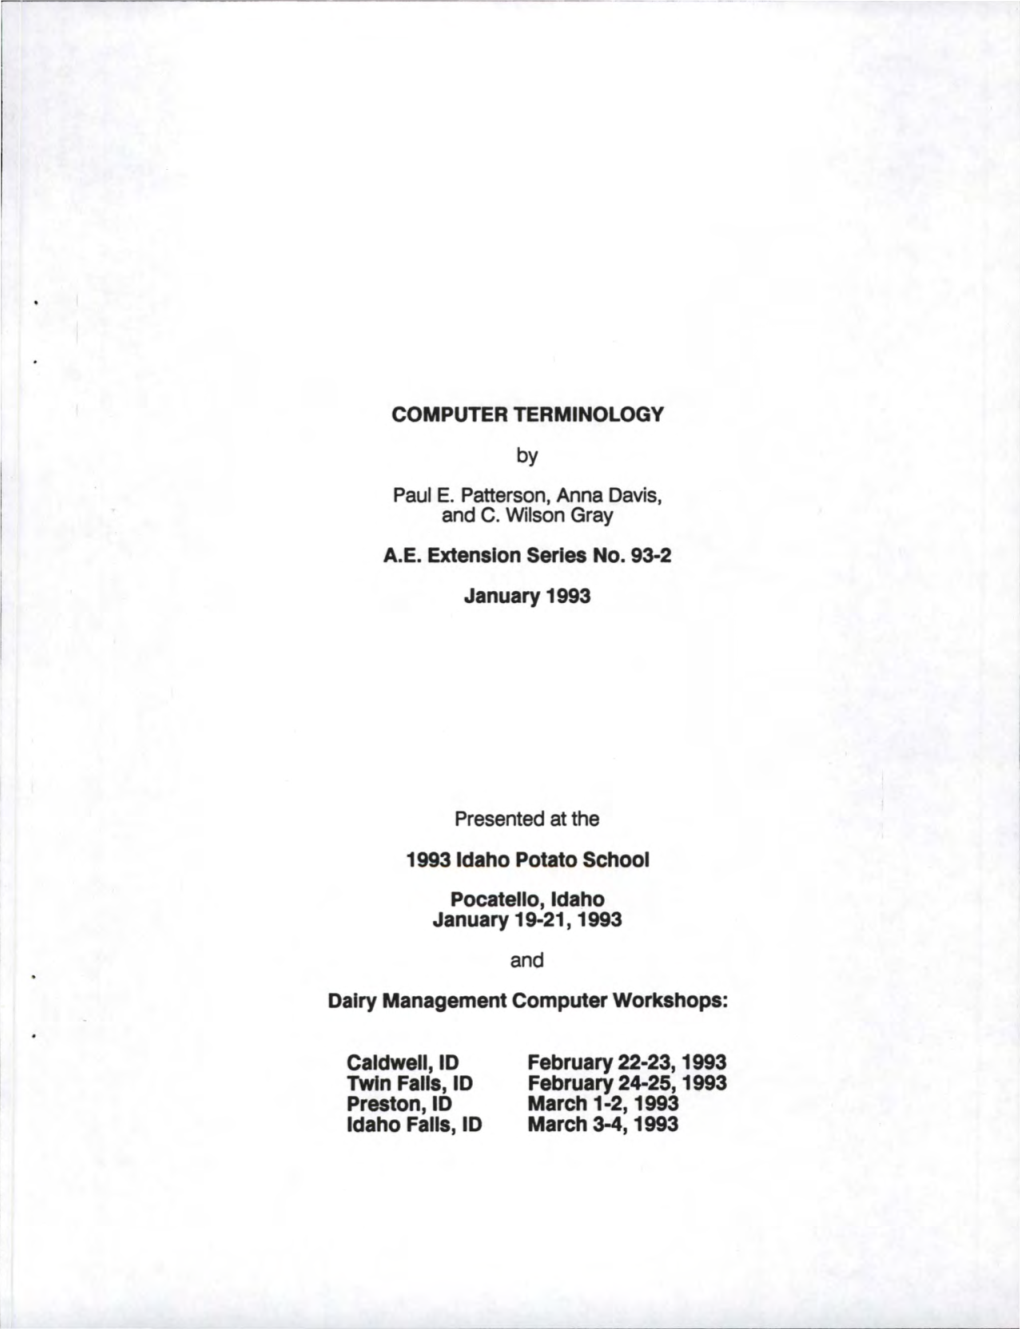 COMPUTER TERMINOLOGY Paul E. Patterson, Anna Davis, and C. Wilson Gray A.E. Extension Series No. 93-2 January 1993 Presented At